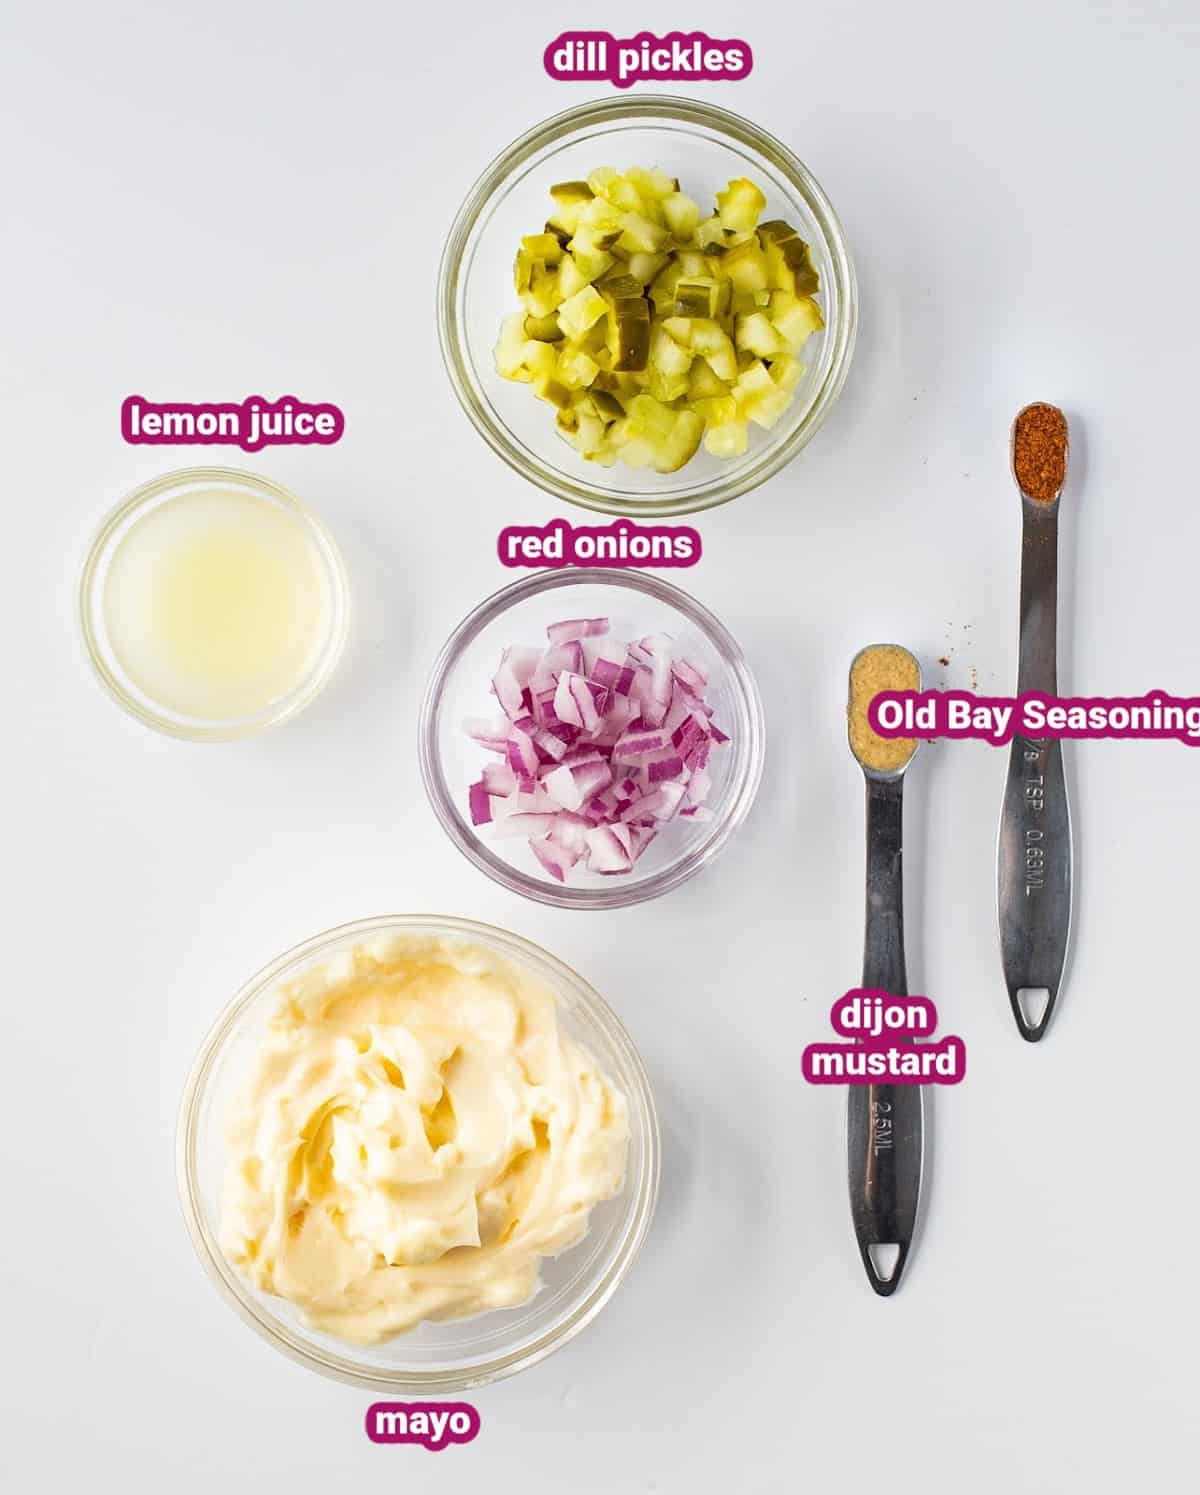 a photo of the ingredients for homemade keto tartar sauce like mayonnaise, chopped dill pickles, fresh lemon juice, red onions, dijon mustard, and old bay seasoning